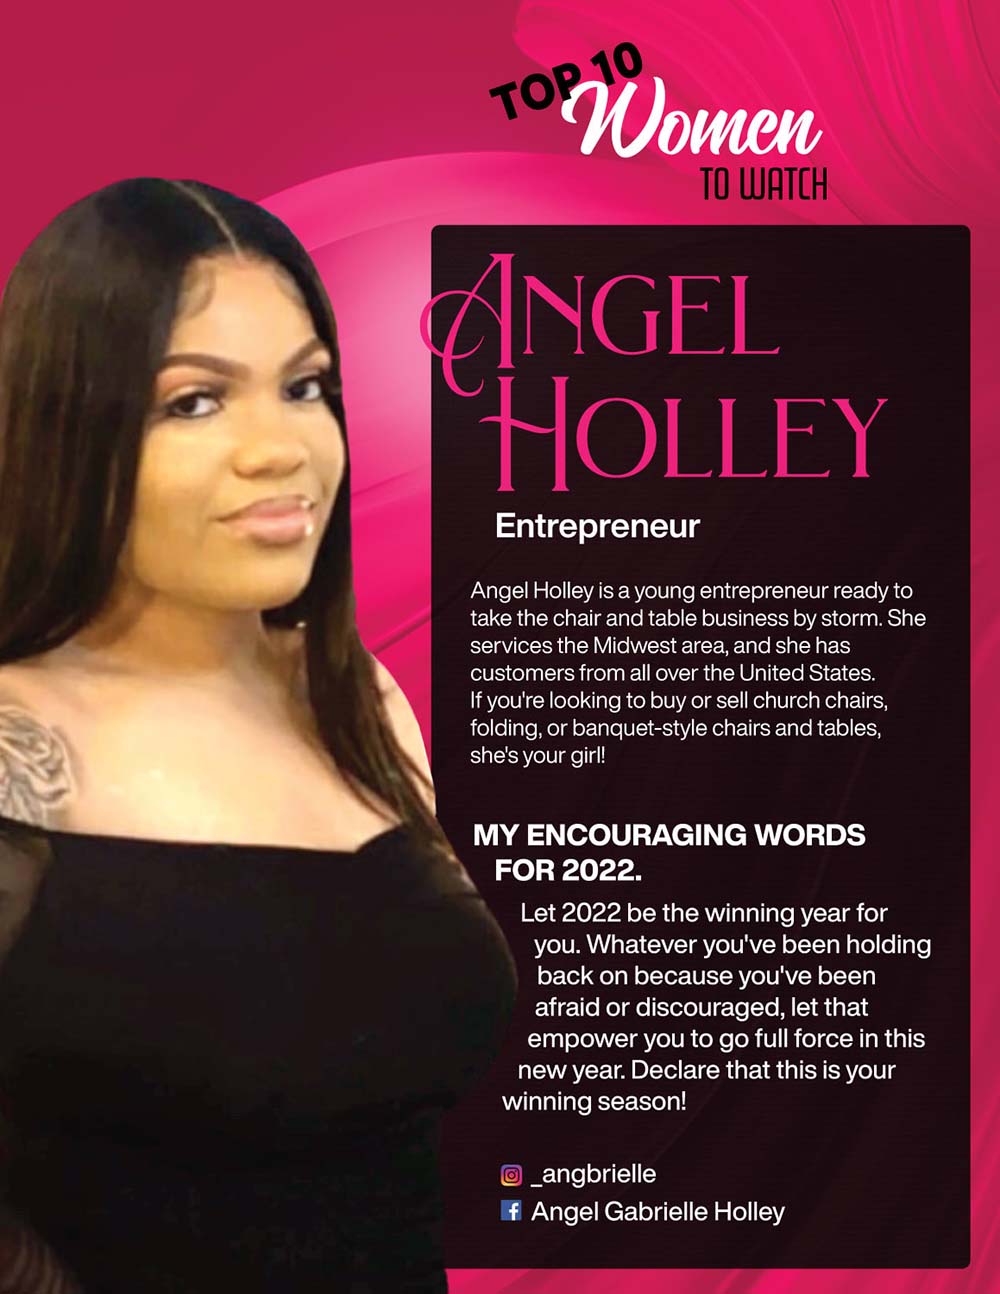 Courageous - Woman - Magazine - women - to - watch - Angel - Holley 